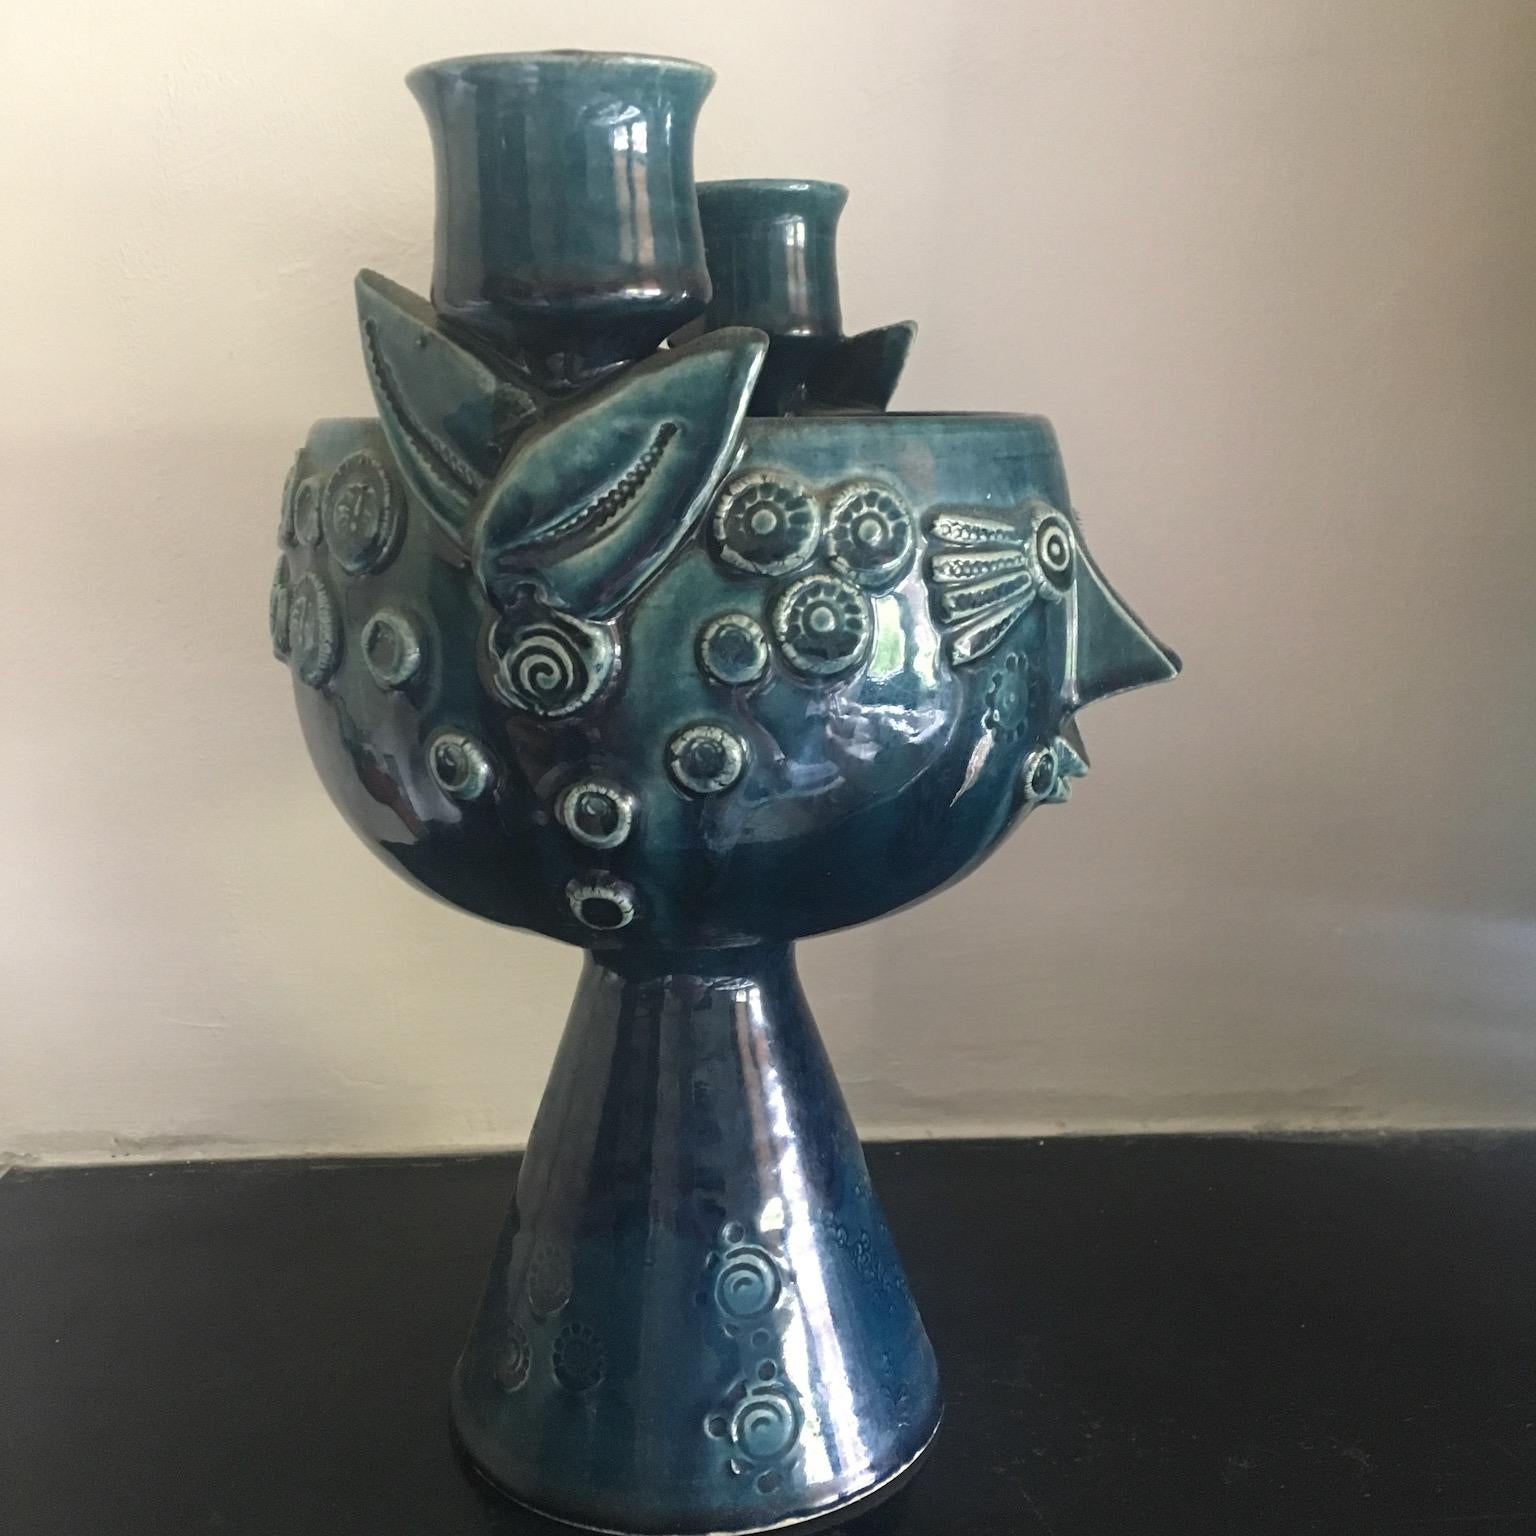 This is a very fine early example of Danish artist Bjørn Wiinblad's work for Rosenthal. Double candleholder surrounding one central vessel with decorative face. Combine it with other candle holders for a charming midcentury or Bohemian look.